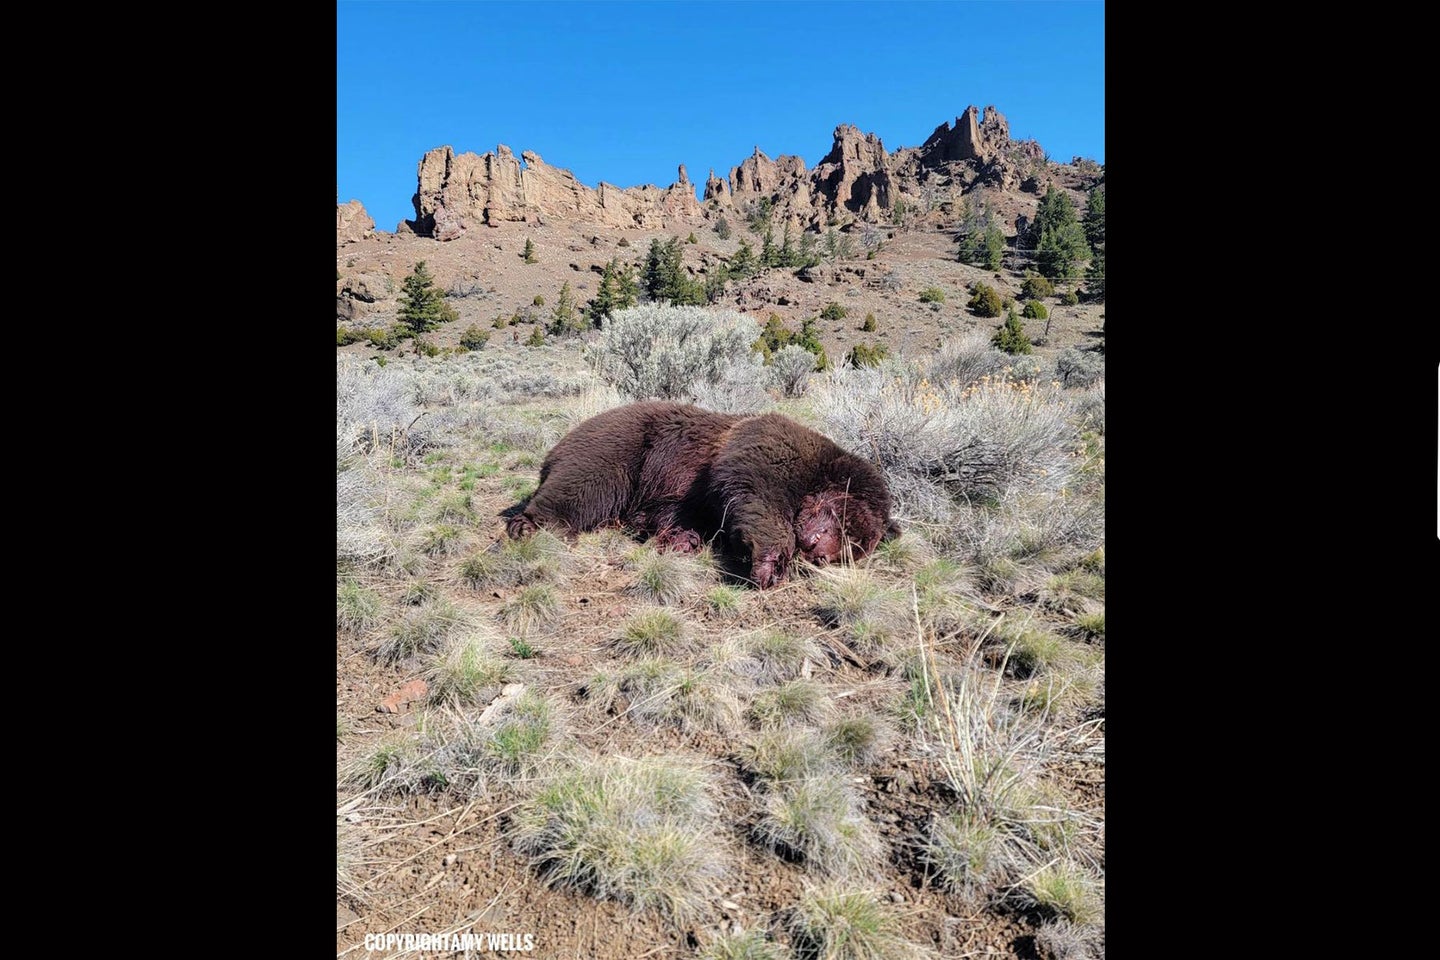 grizzly bear poached near yellowstone